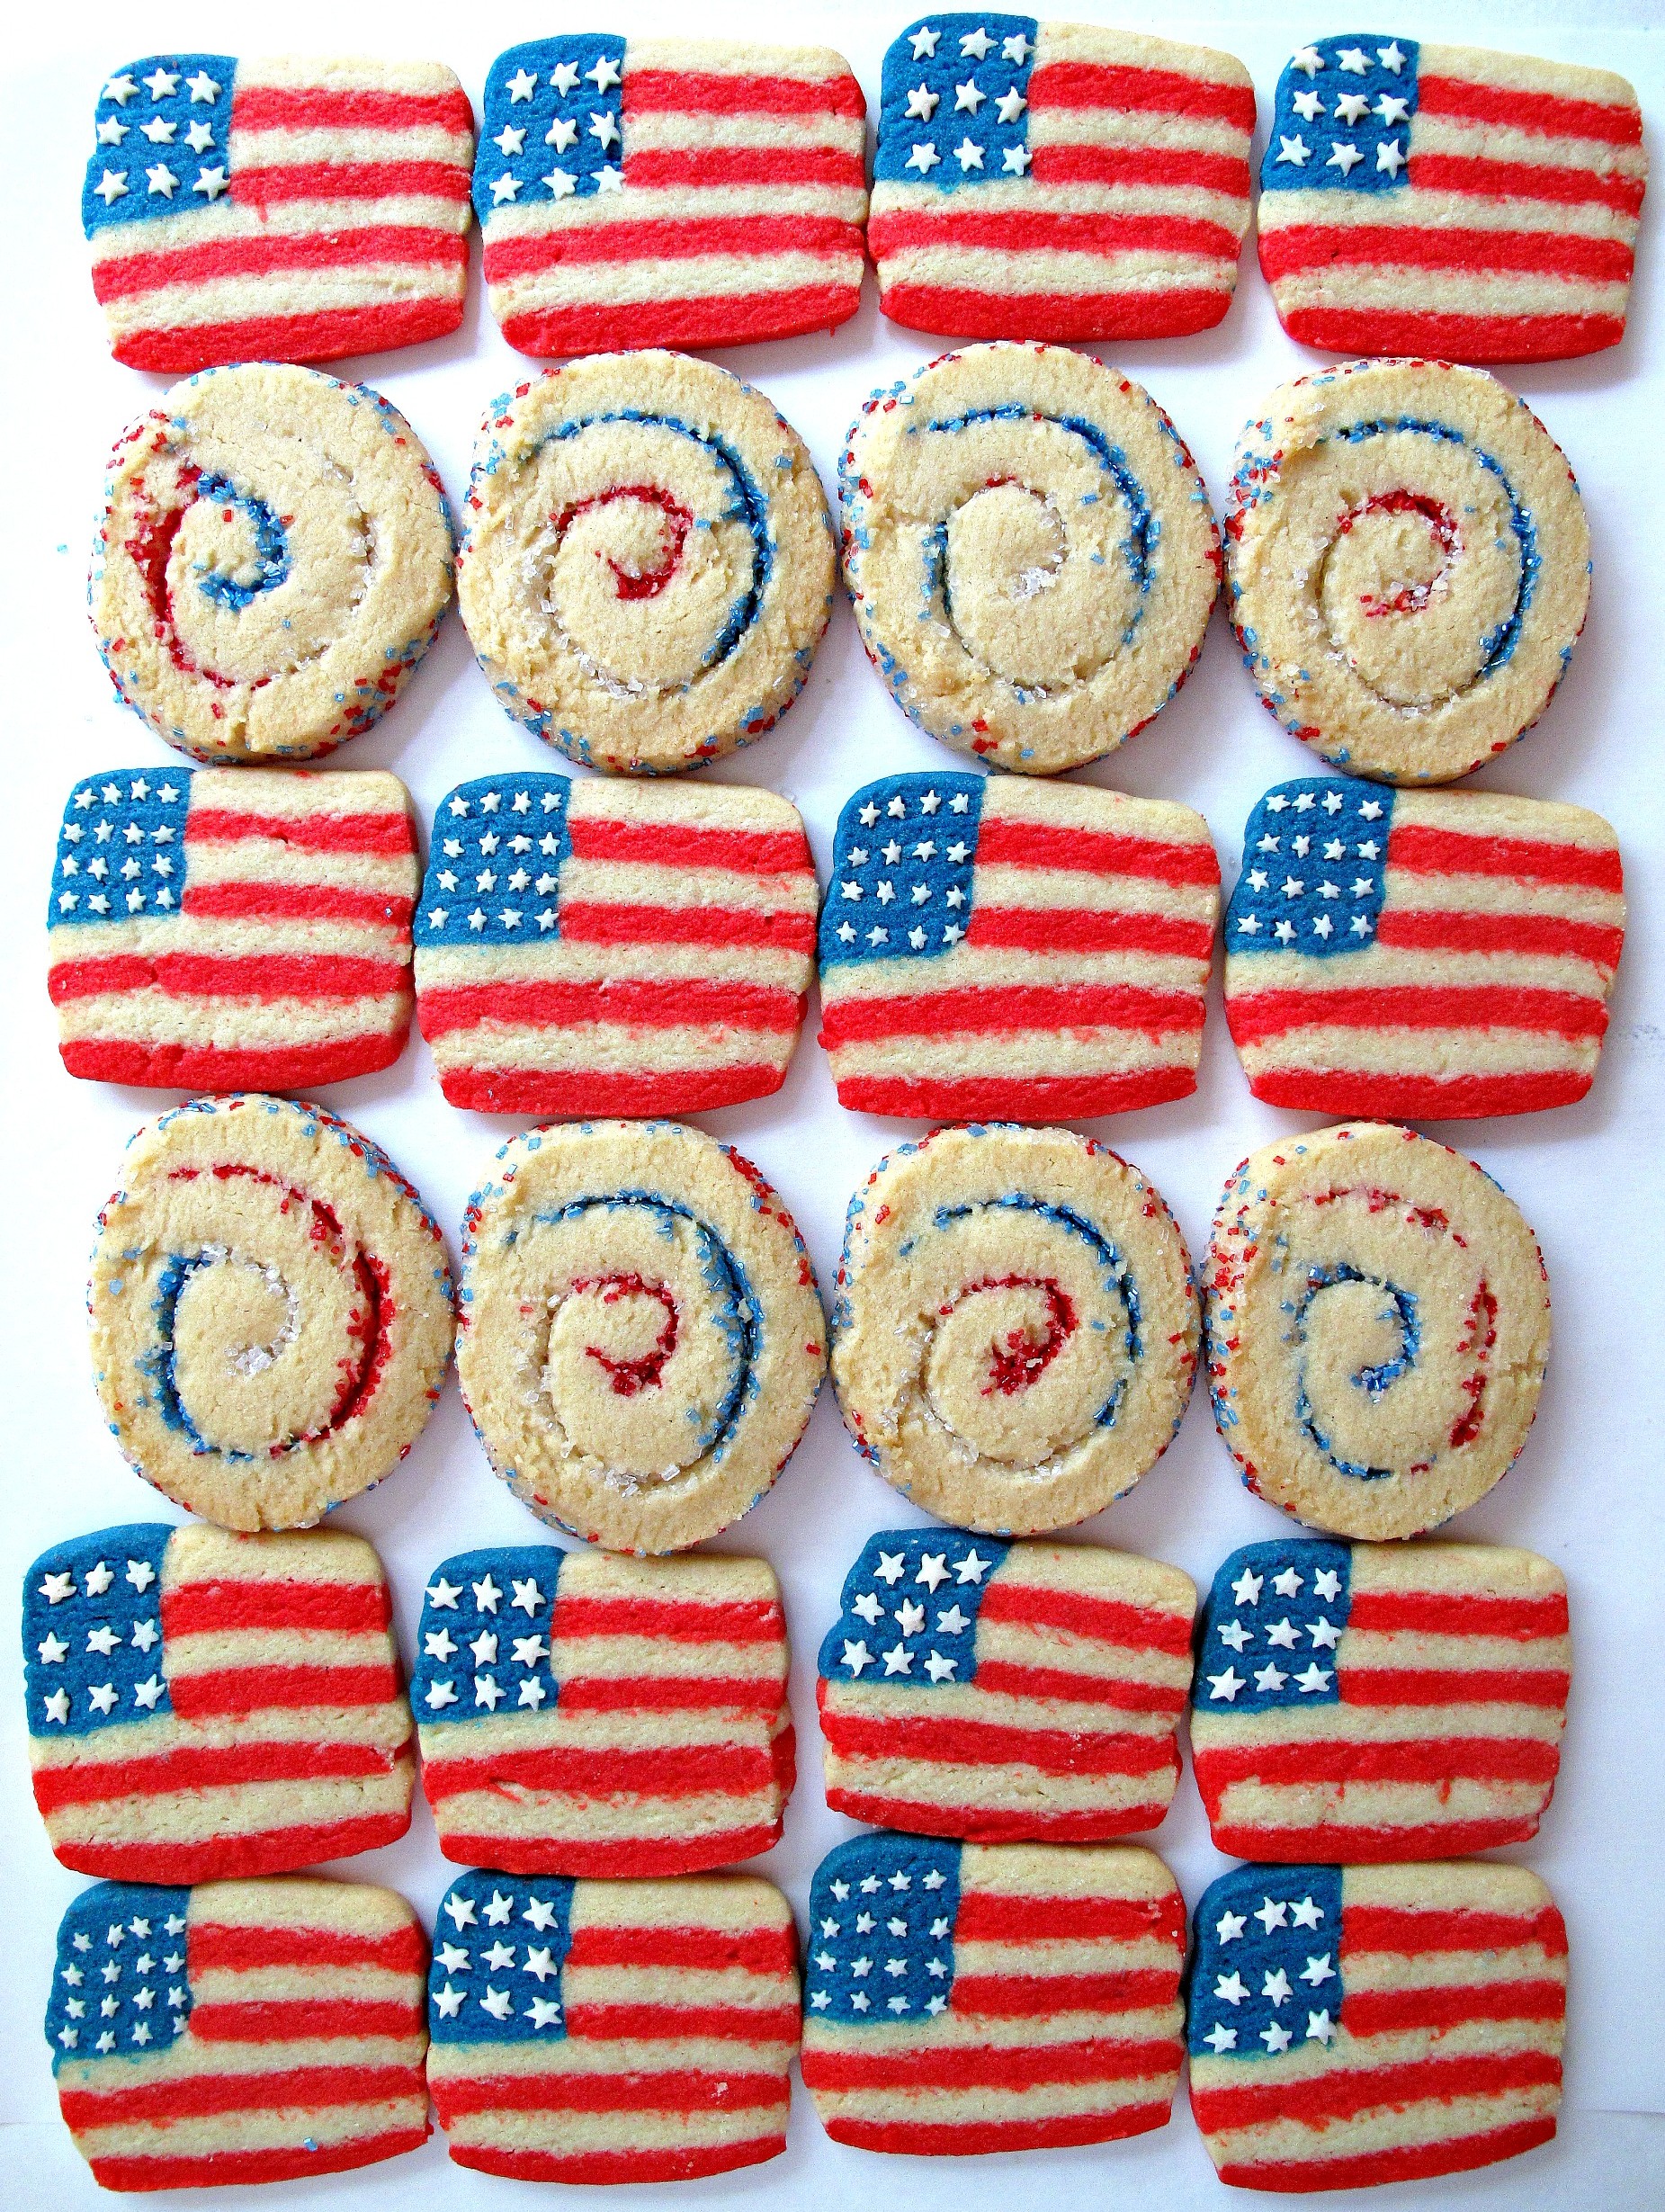 Rows of striped flag cookies and cookies swirled with red, white and blue sugar. 